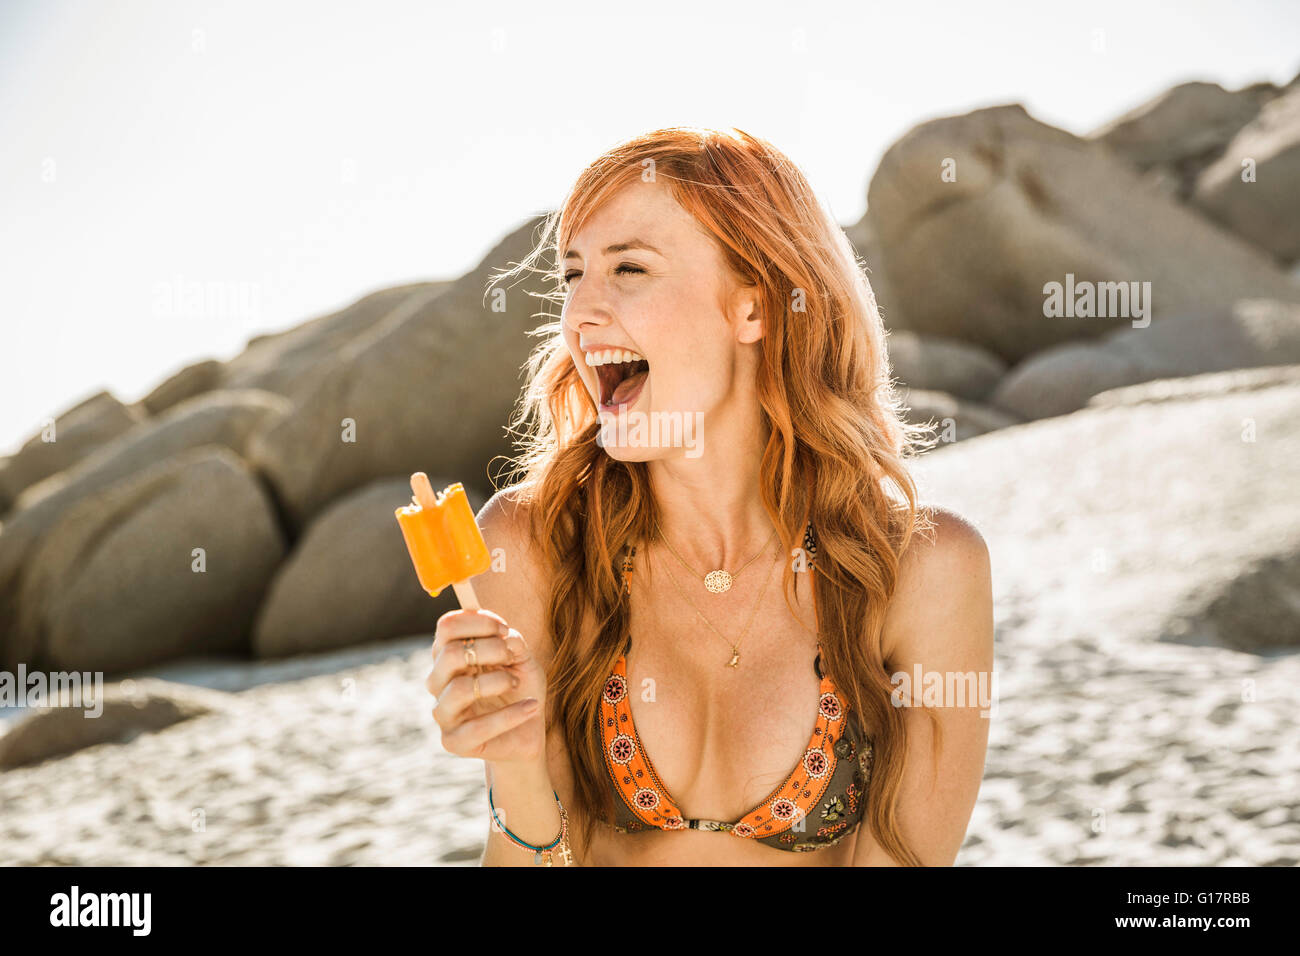 Laughing woman with long red hair eating ice lolly on beach, Cape Town, South Africa Stock Photo